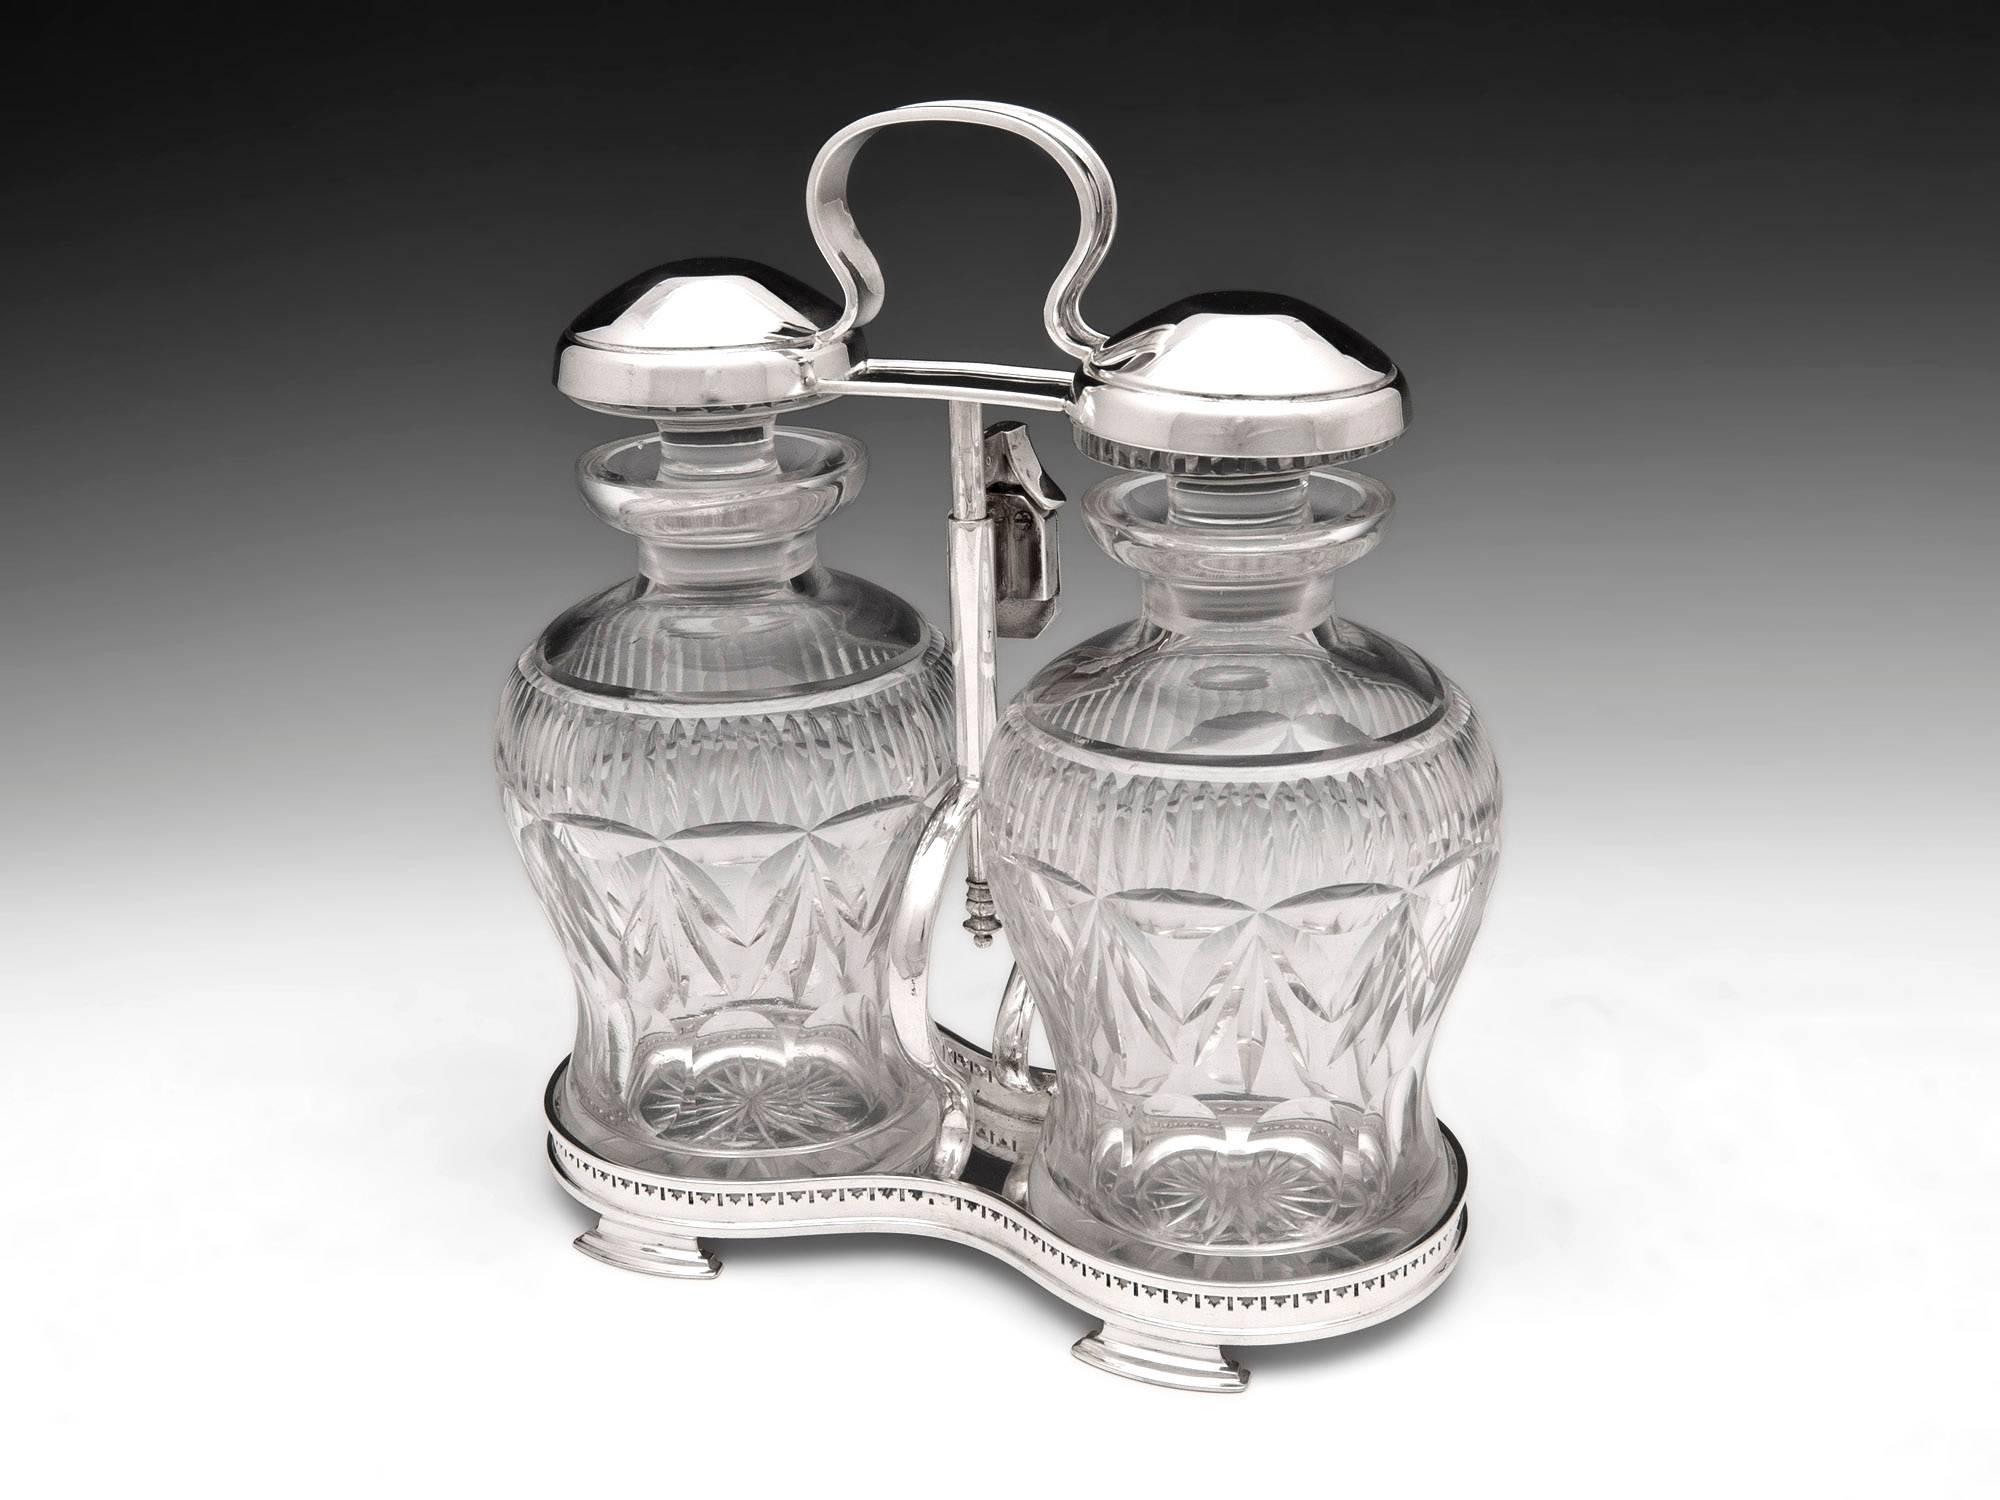 Silver plated Tantalus with two fabulous cut glass decanters.

The decanters are released by unlocking the handle which will spring up and can than be rotated to allow access to the decanters.

This tantalus comes with a fully work lock and